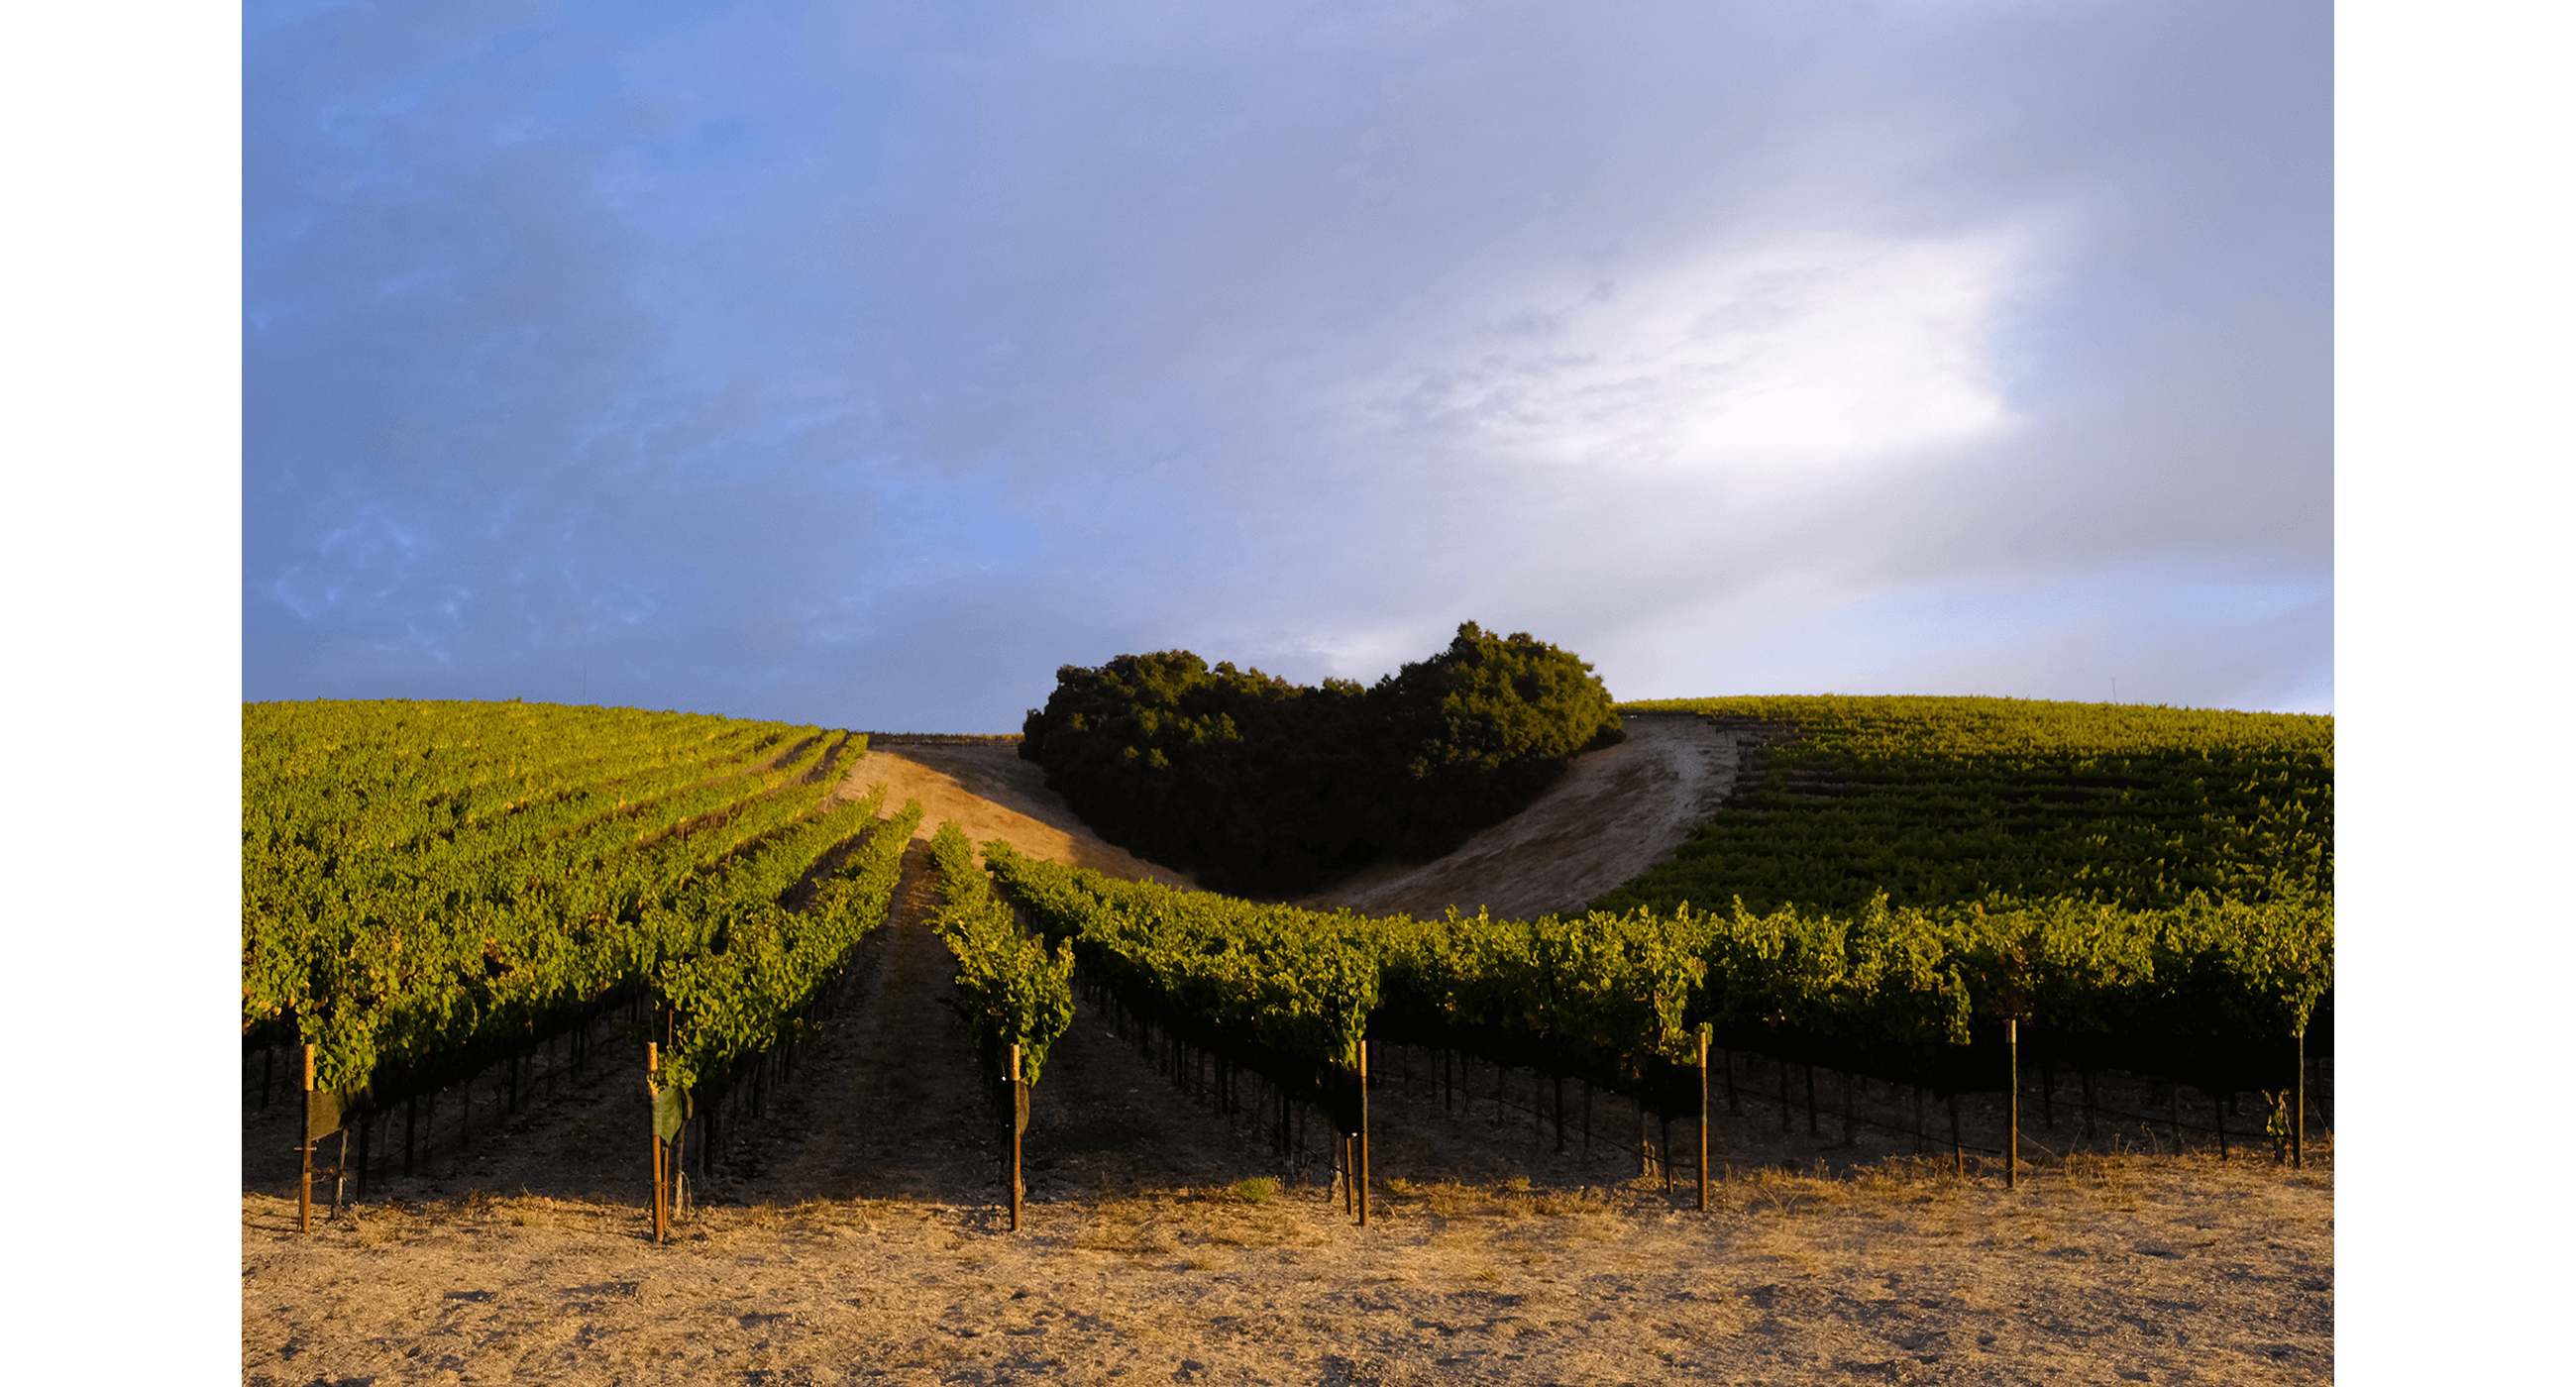 A hillside vineyard with a clump of oak trees that resemble the shape of a heart.